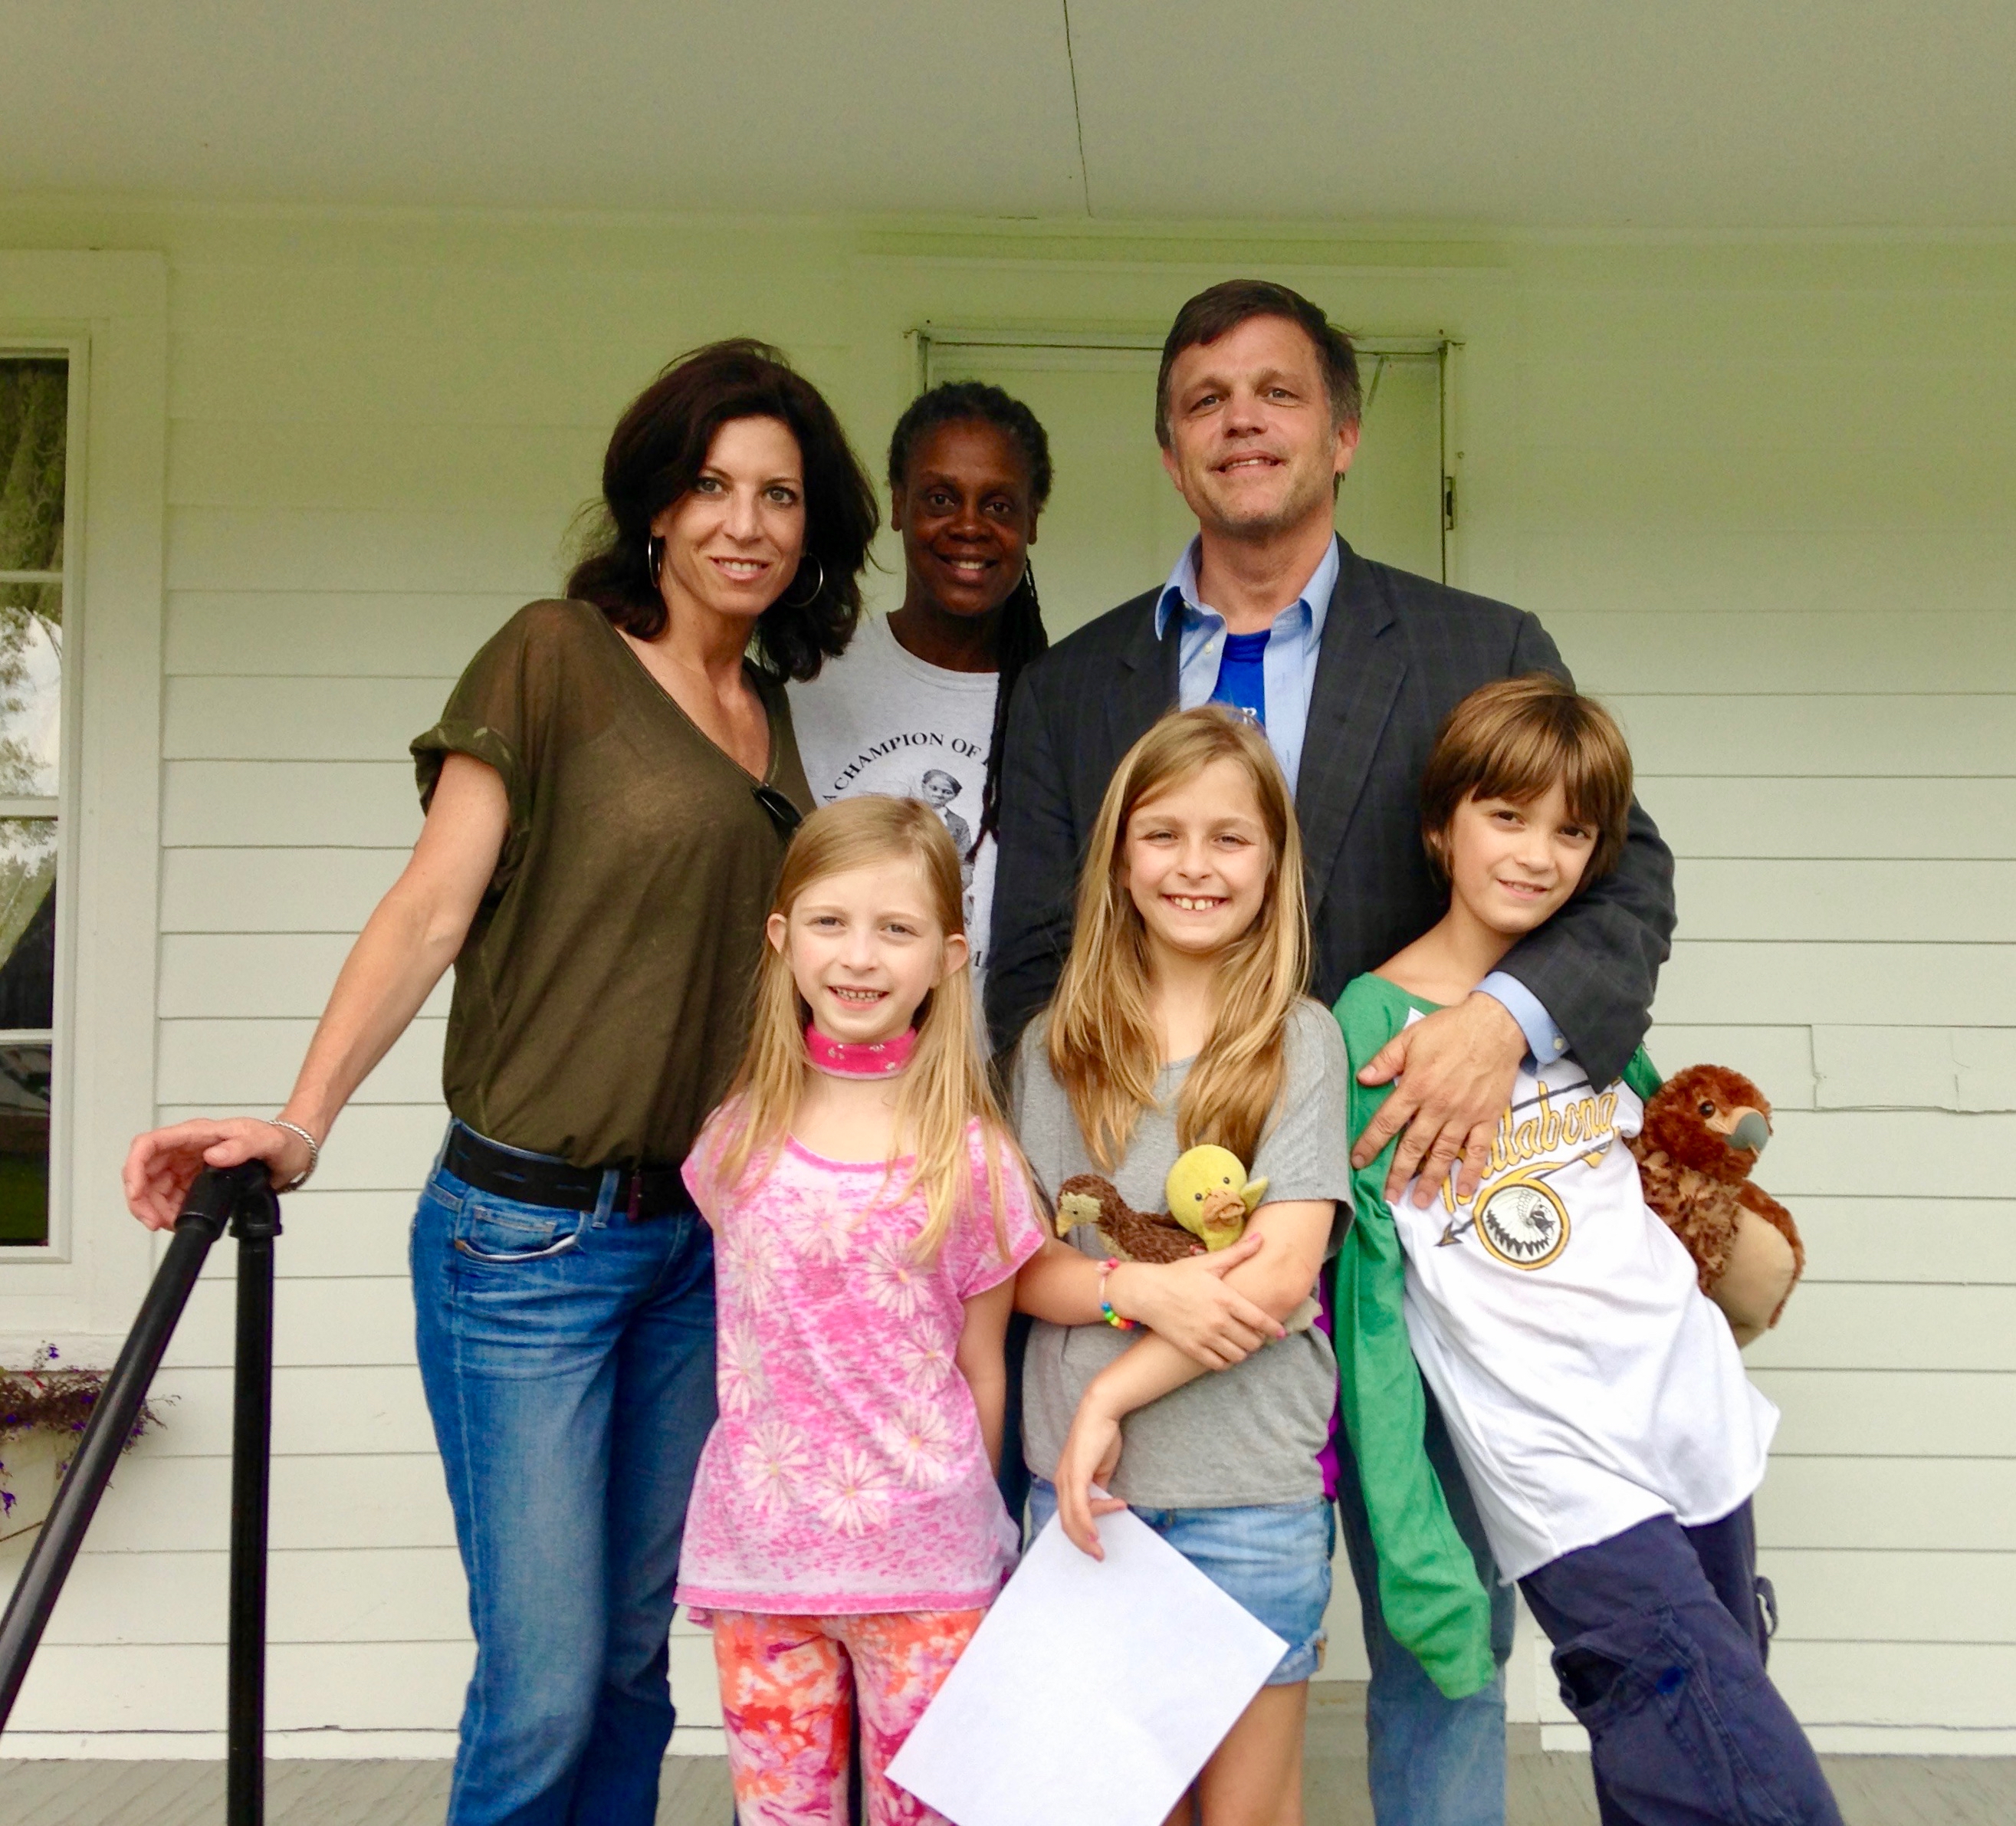 Douglas Brinkley and his family